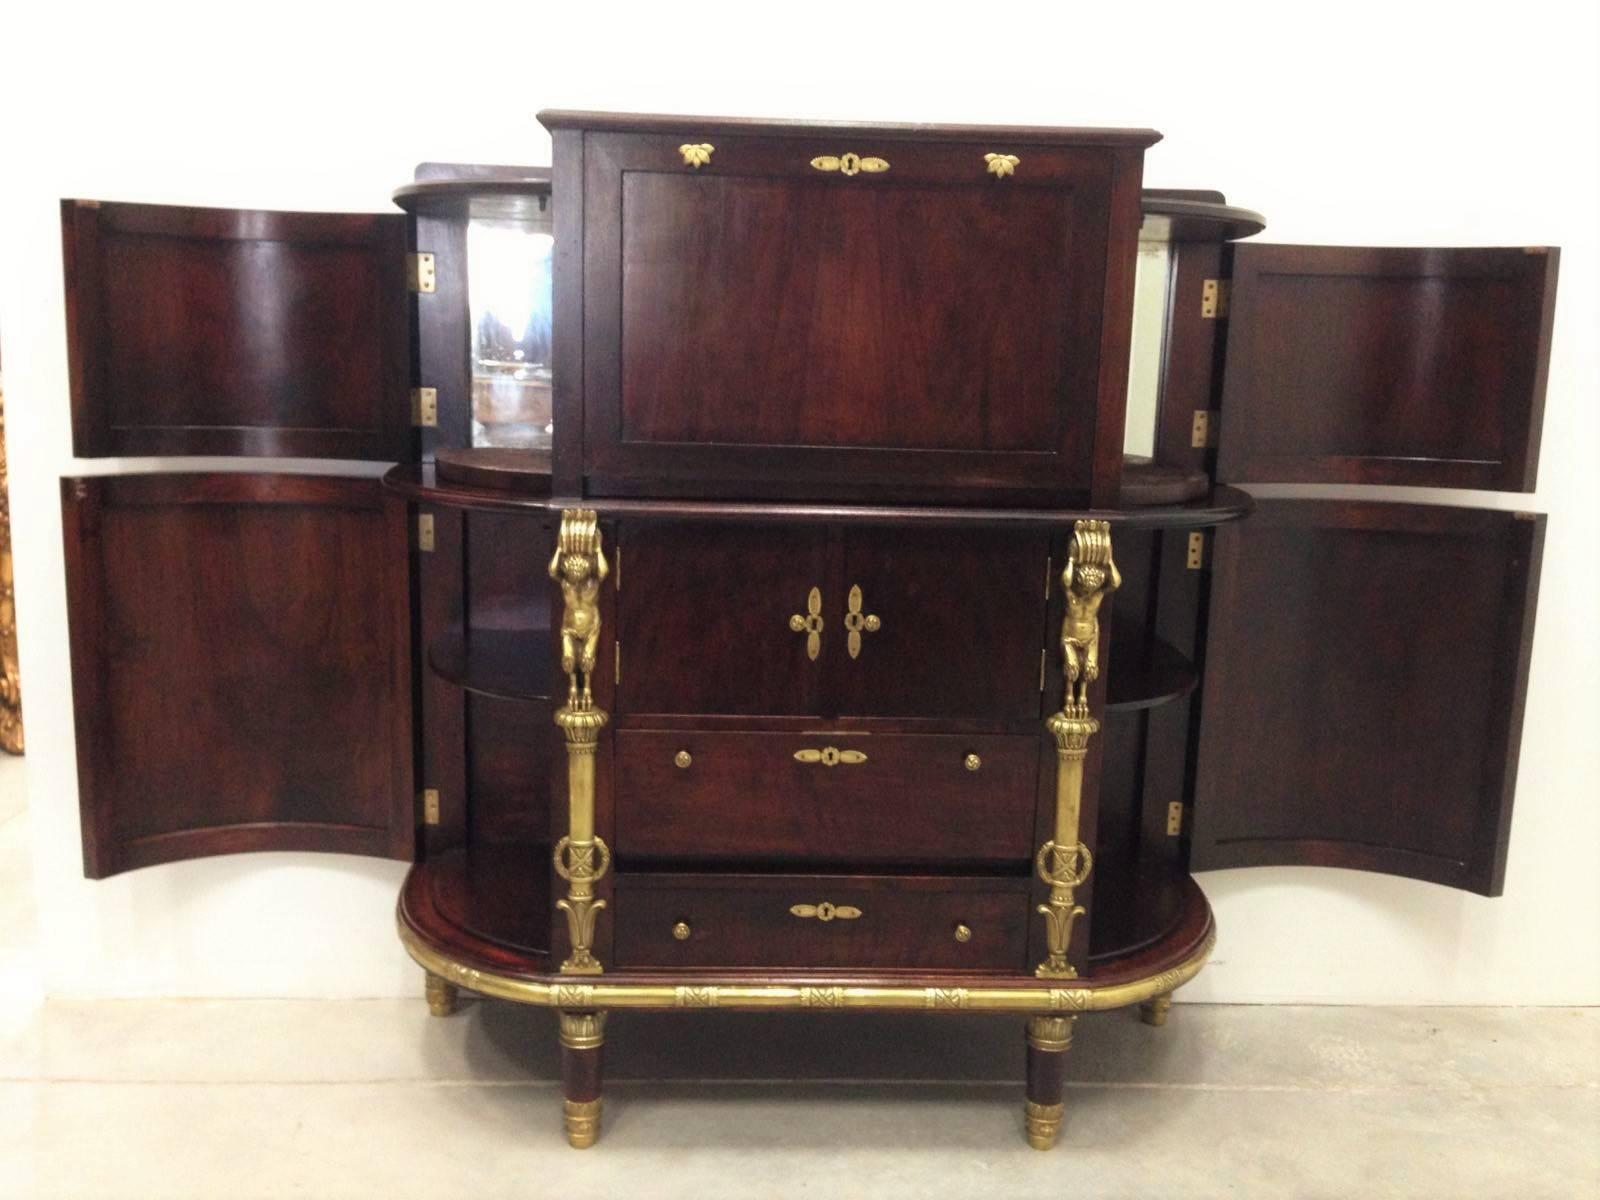 This bar is made of sturdy mahogany. The forefront’s unique flamed finish is simplistic yet stunning, and the bar is adorned with brass drawer pulls, feet, and other decoration to add regal flair. As far as storage goes, there are three drawers on